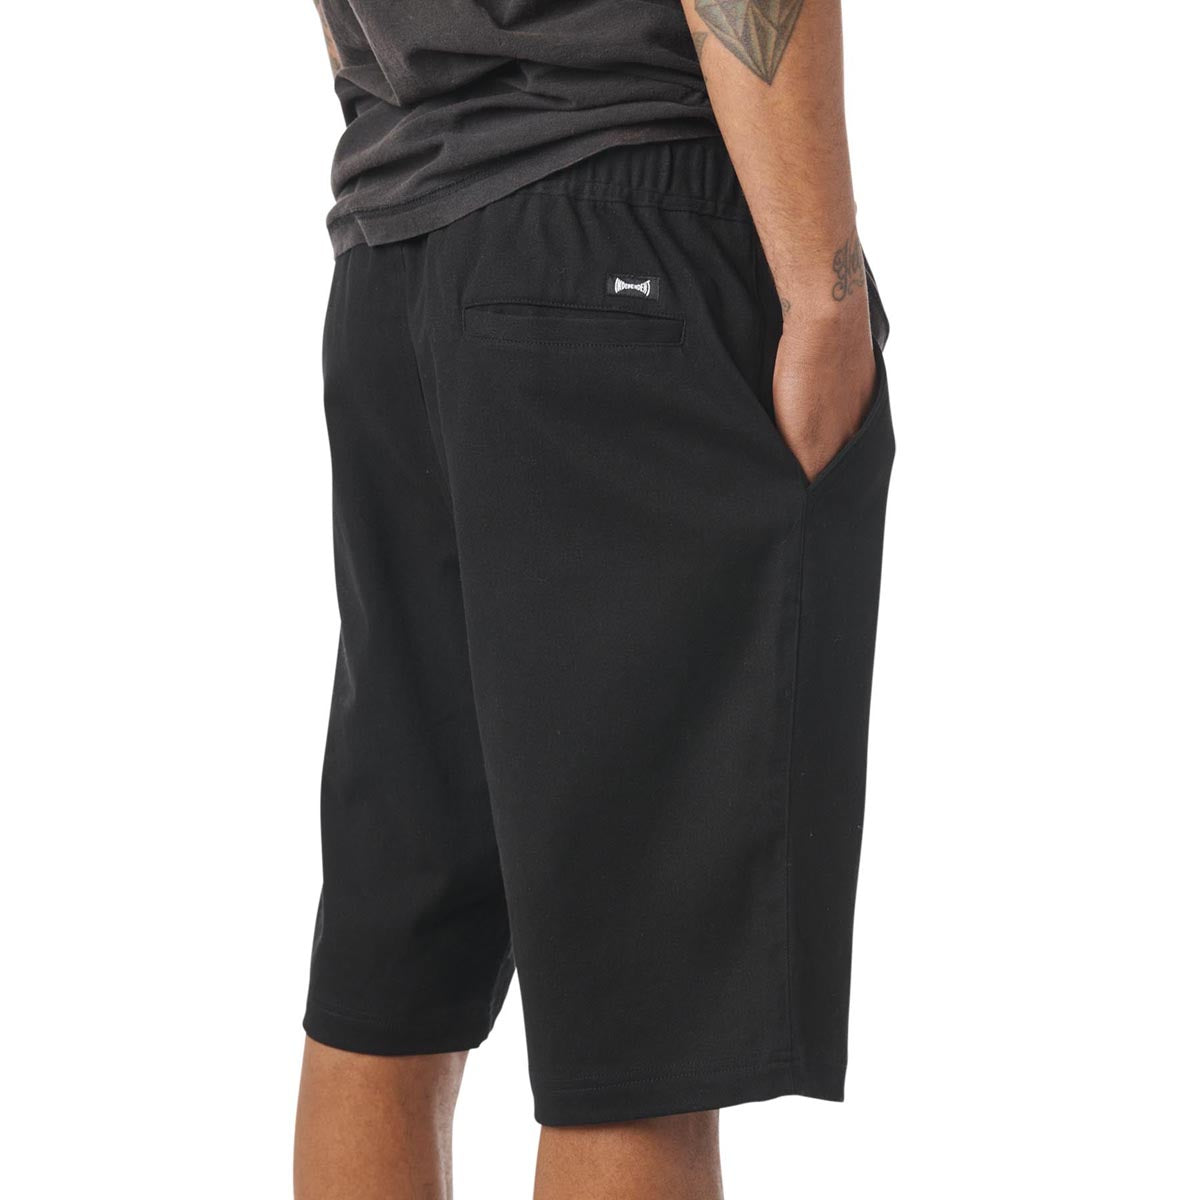 Independent Span Pull On Shorts - Black image 3